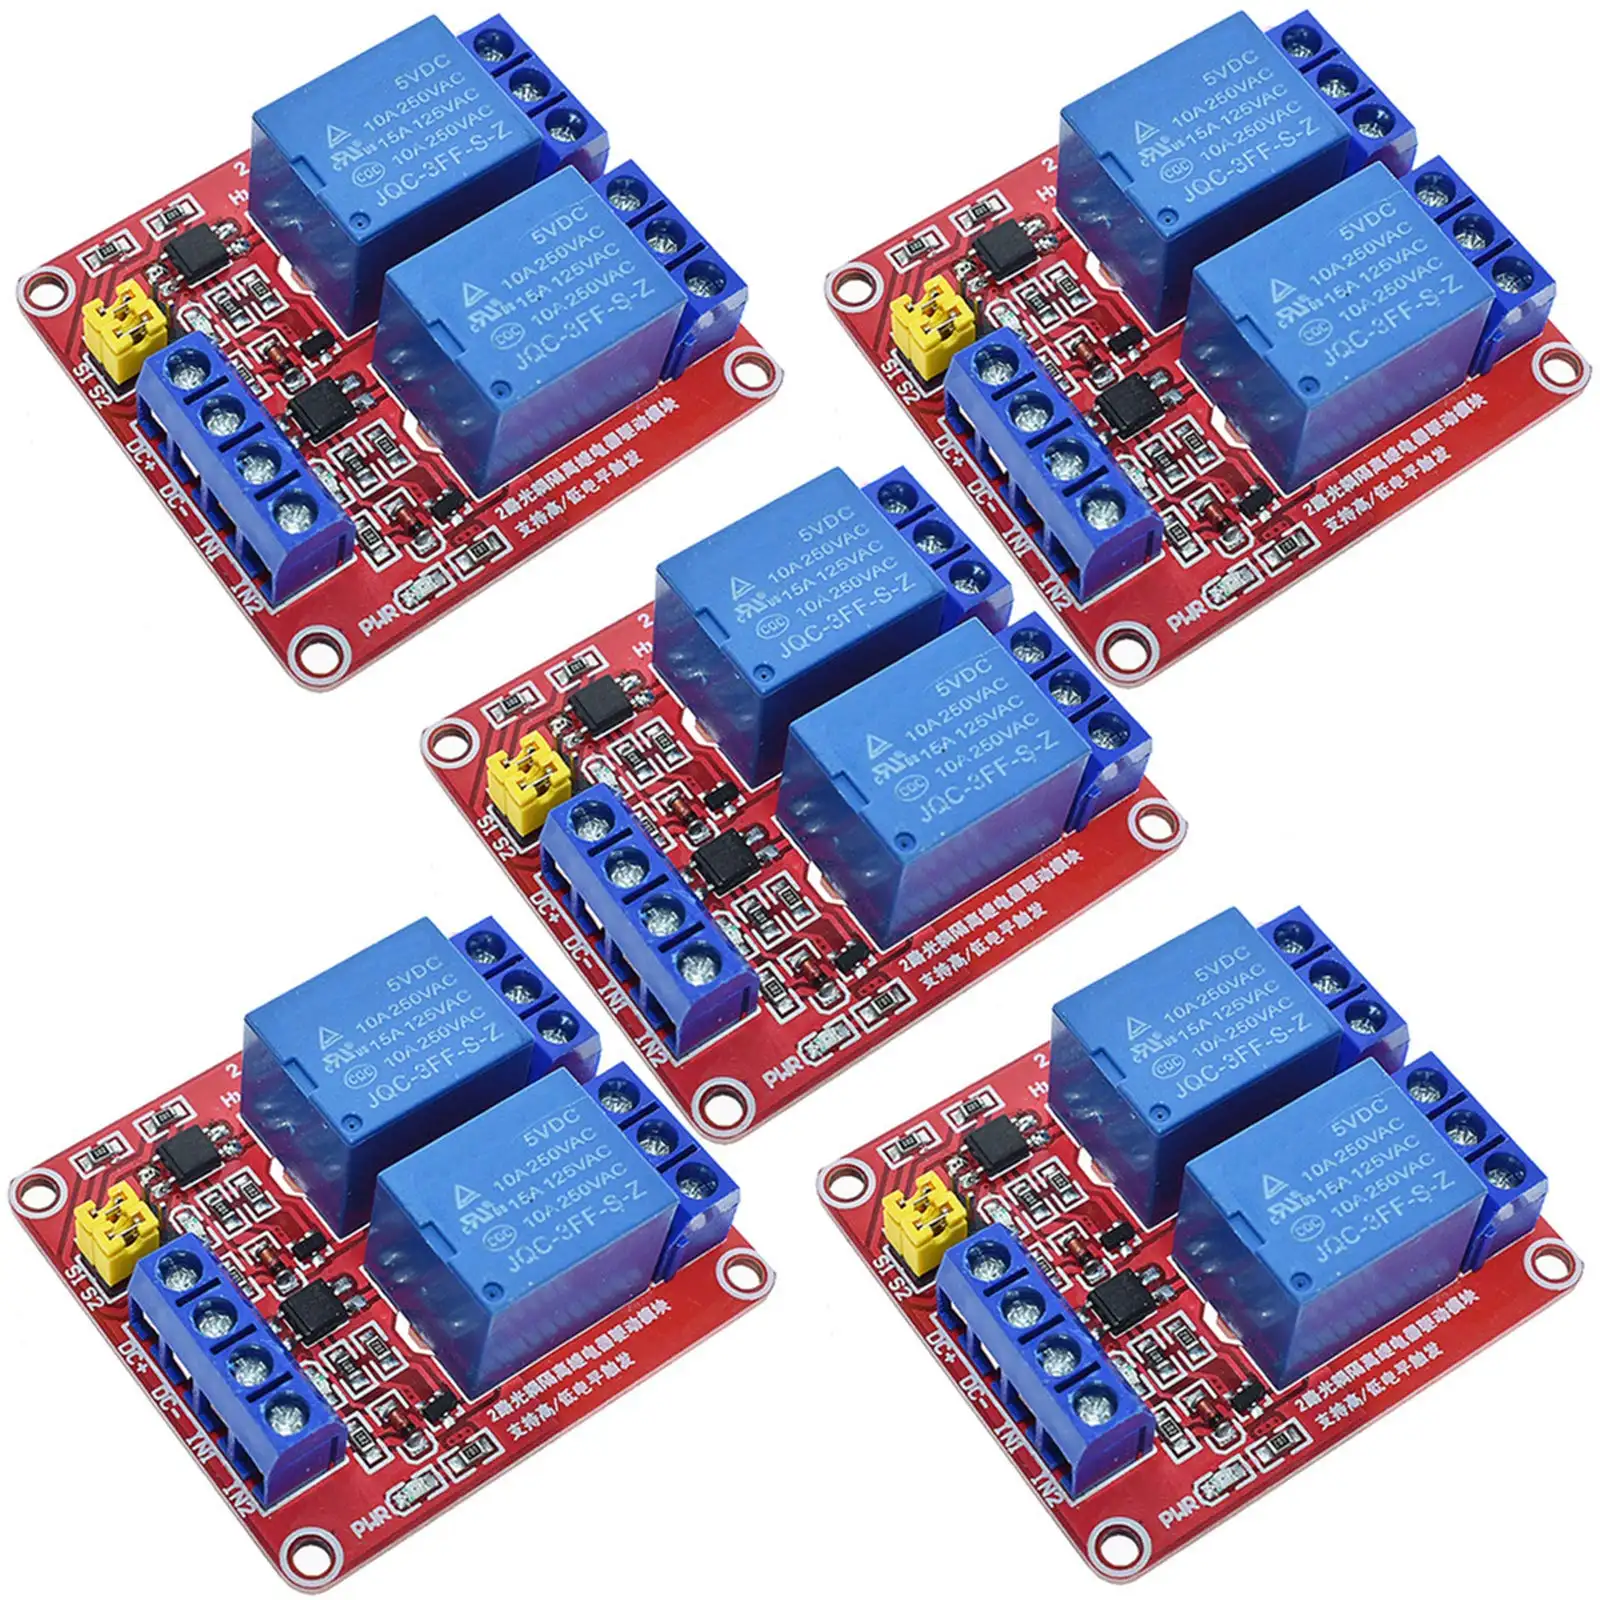 5PCS 2 Channel 5V Relay Module with Optocoupler High or Low Level Trigger Expansion Board for Raspberry Pi Arduino